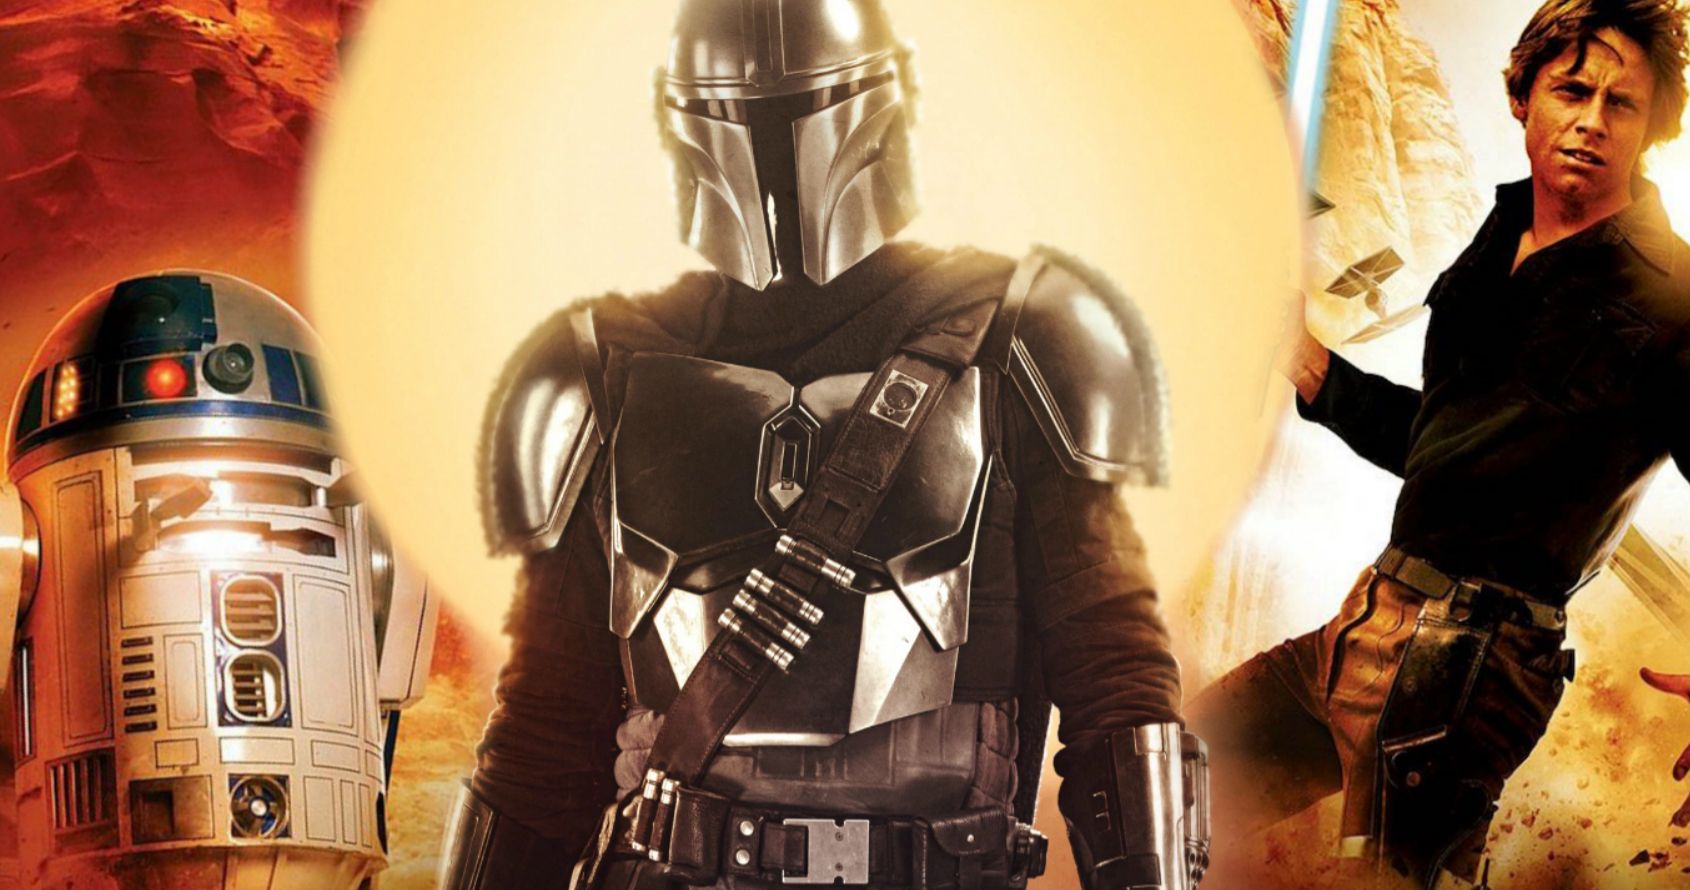 The Mandalorian Team to Lead Star Wars Into the Future?